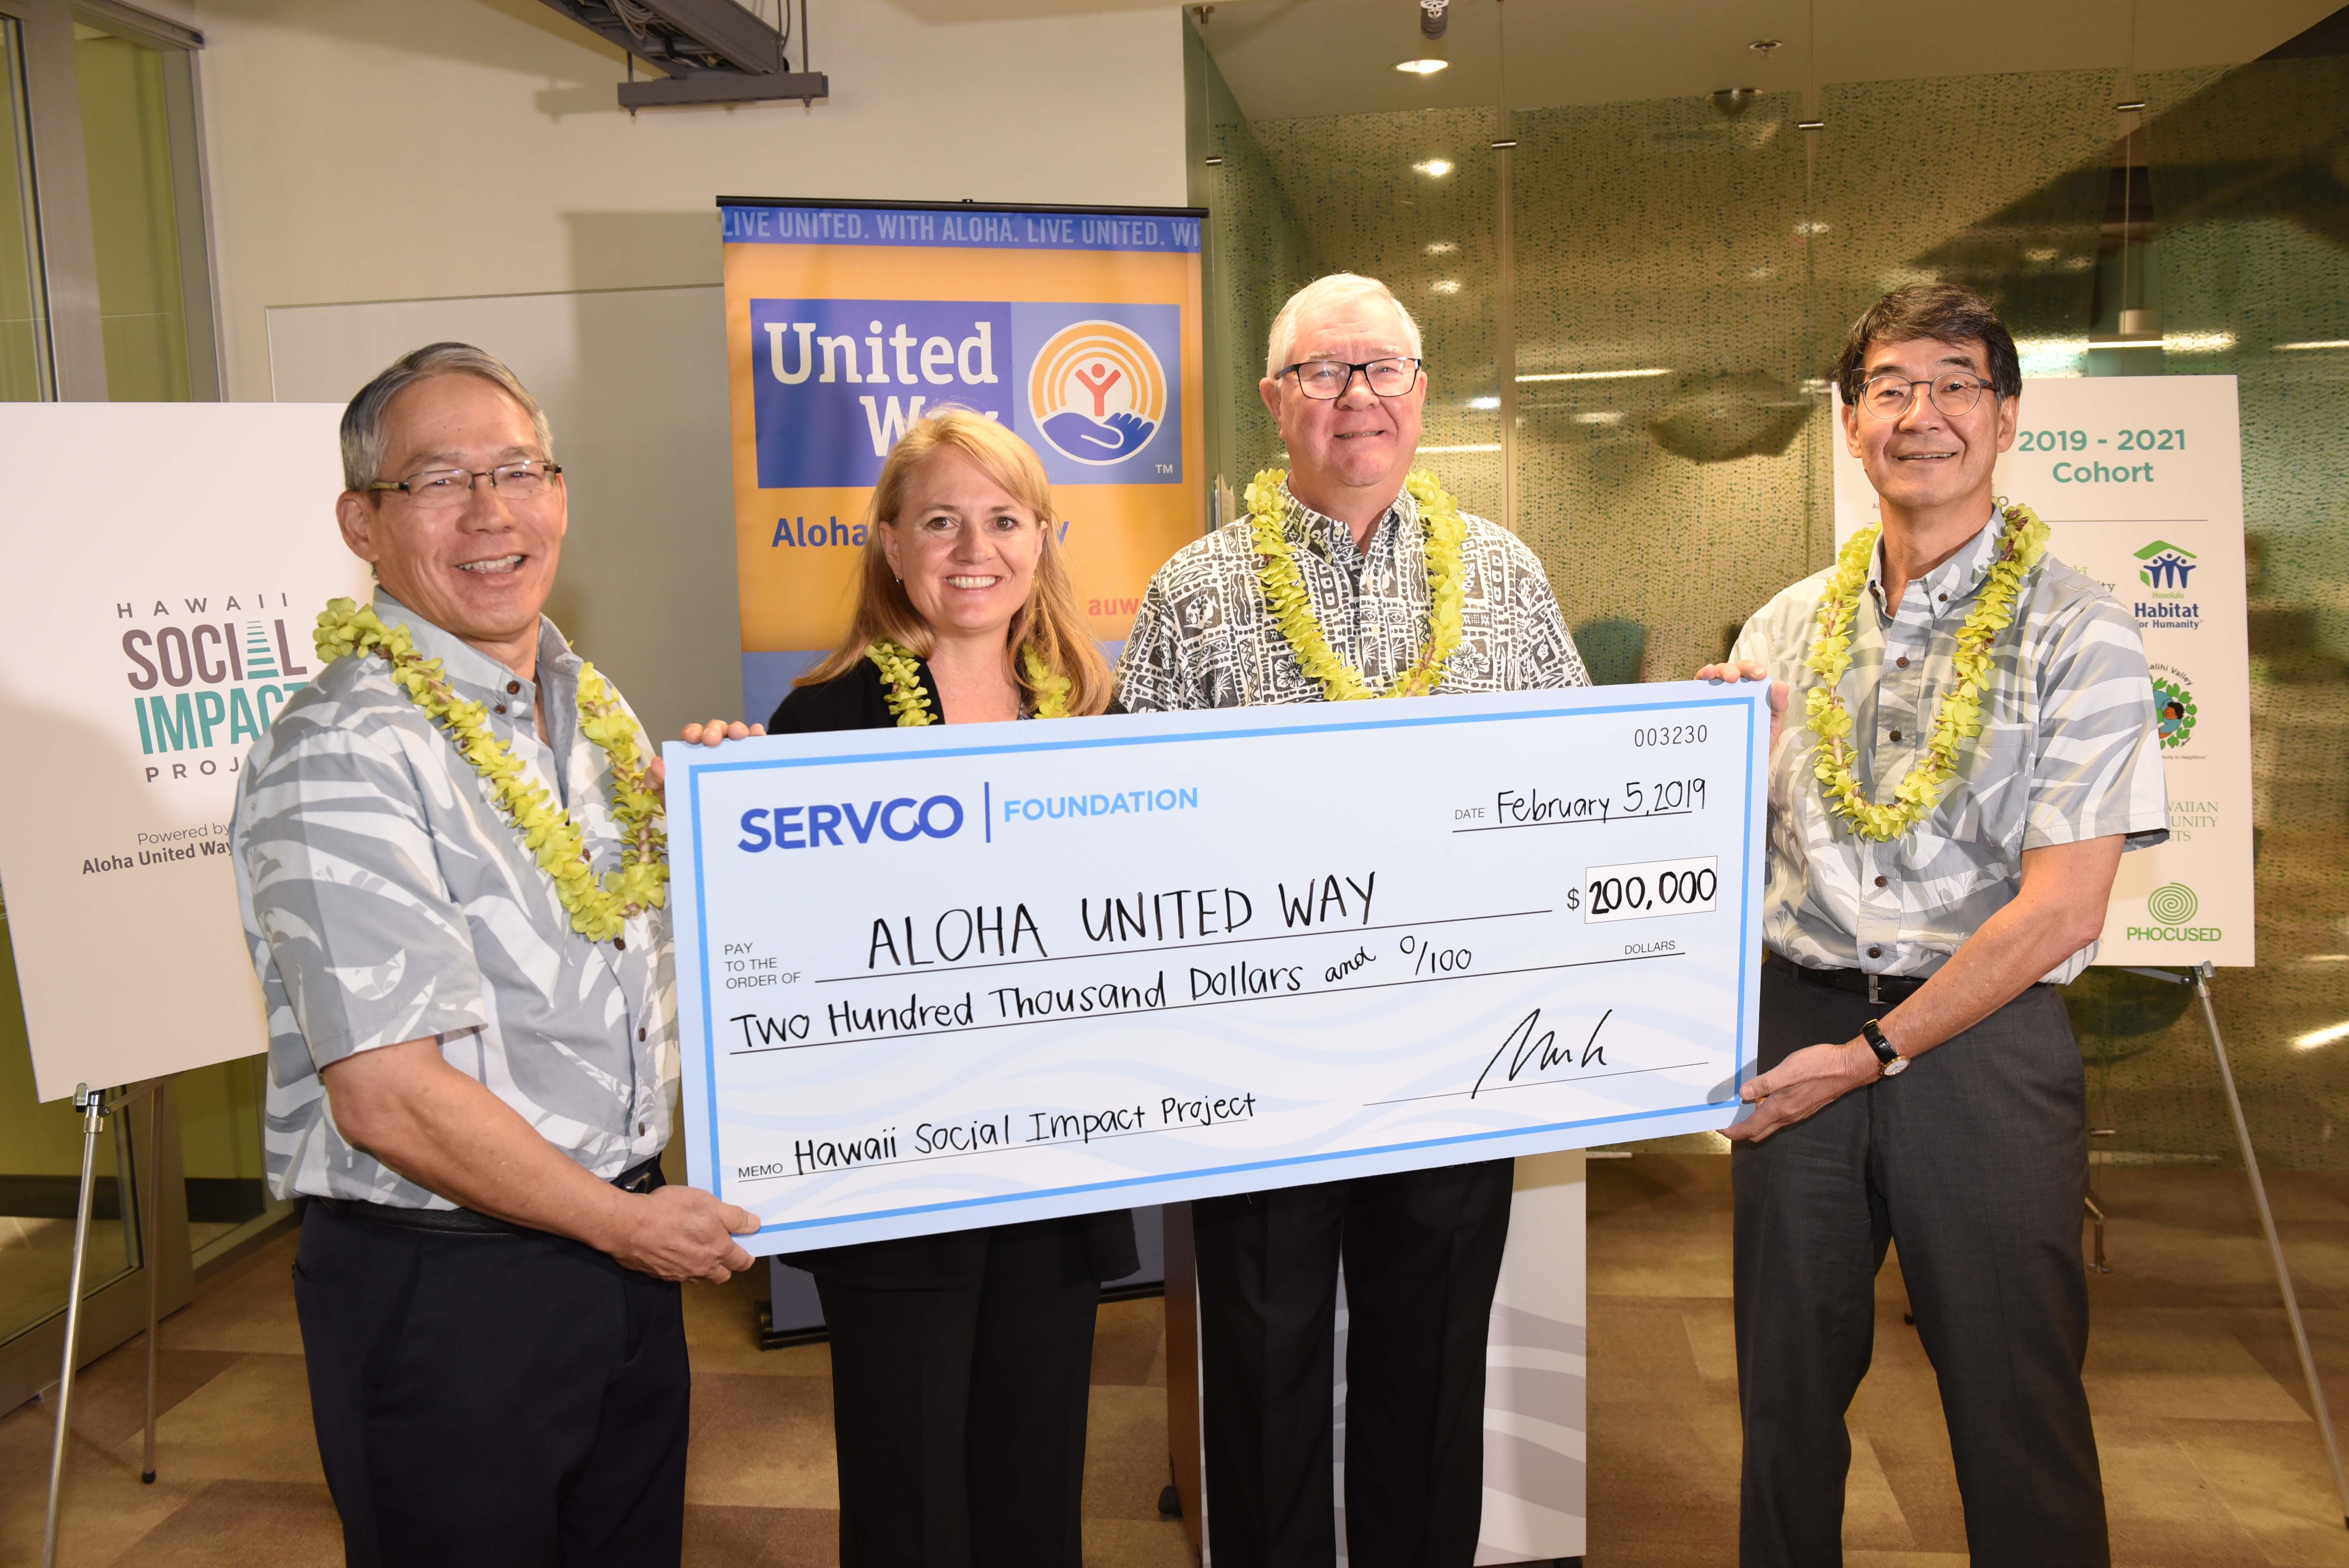 The Servco Foundation and Aloha United Way launch Hawaii Social Impact Project